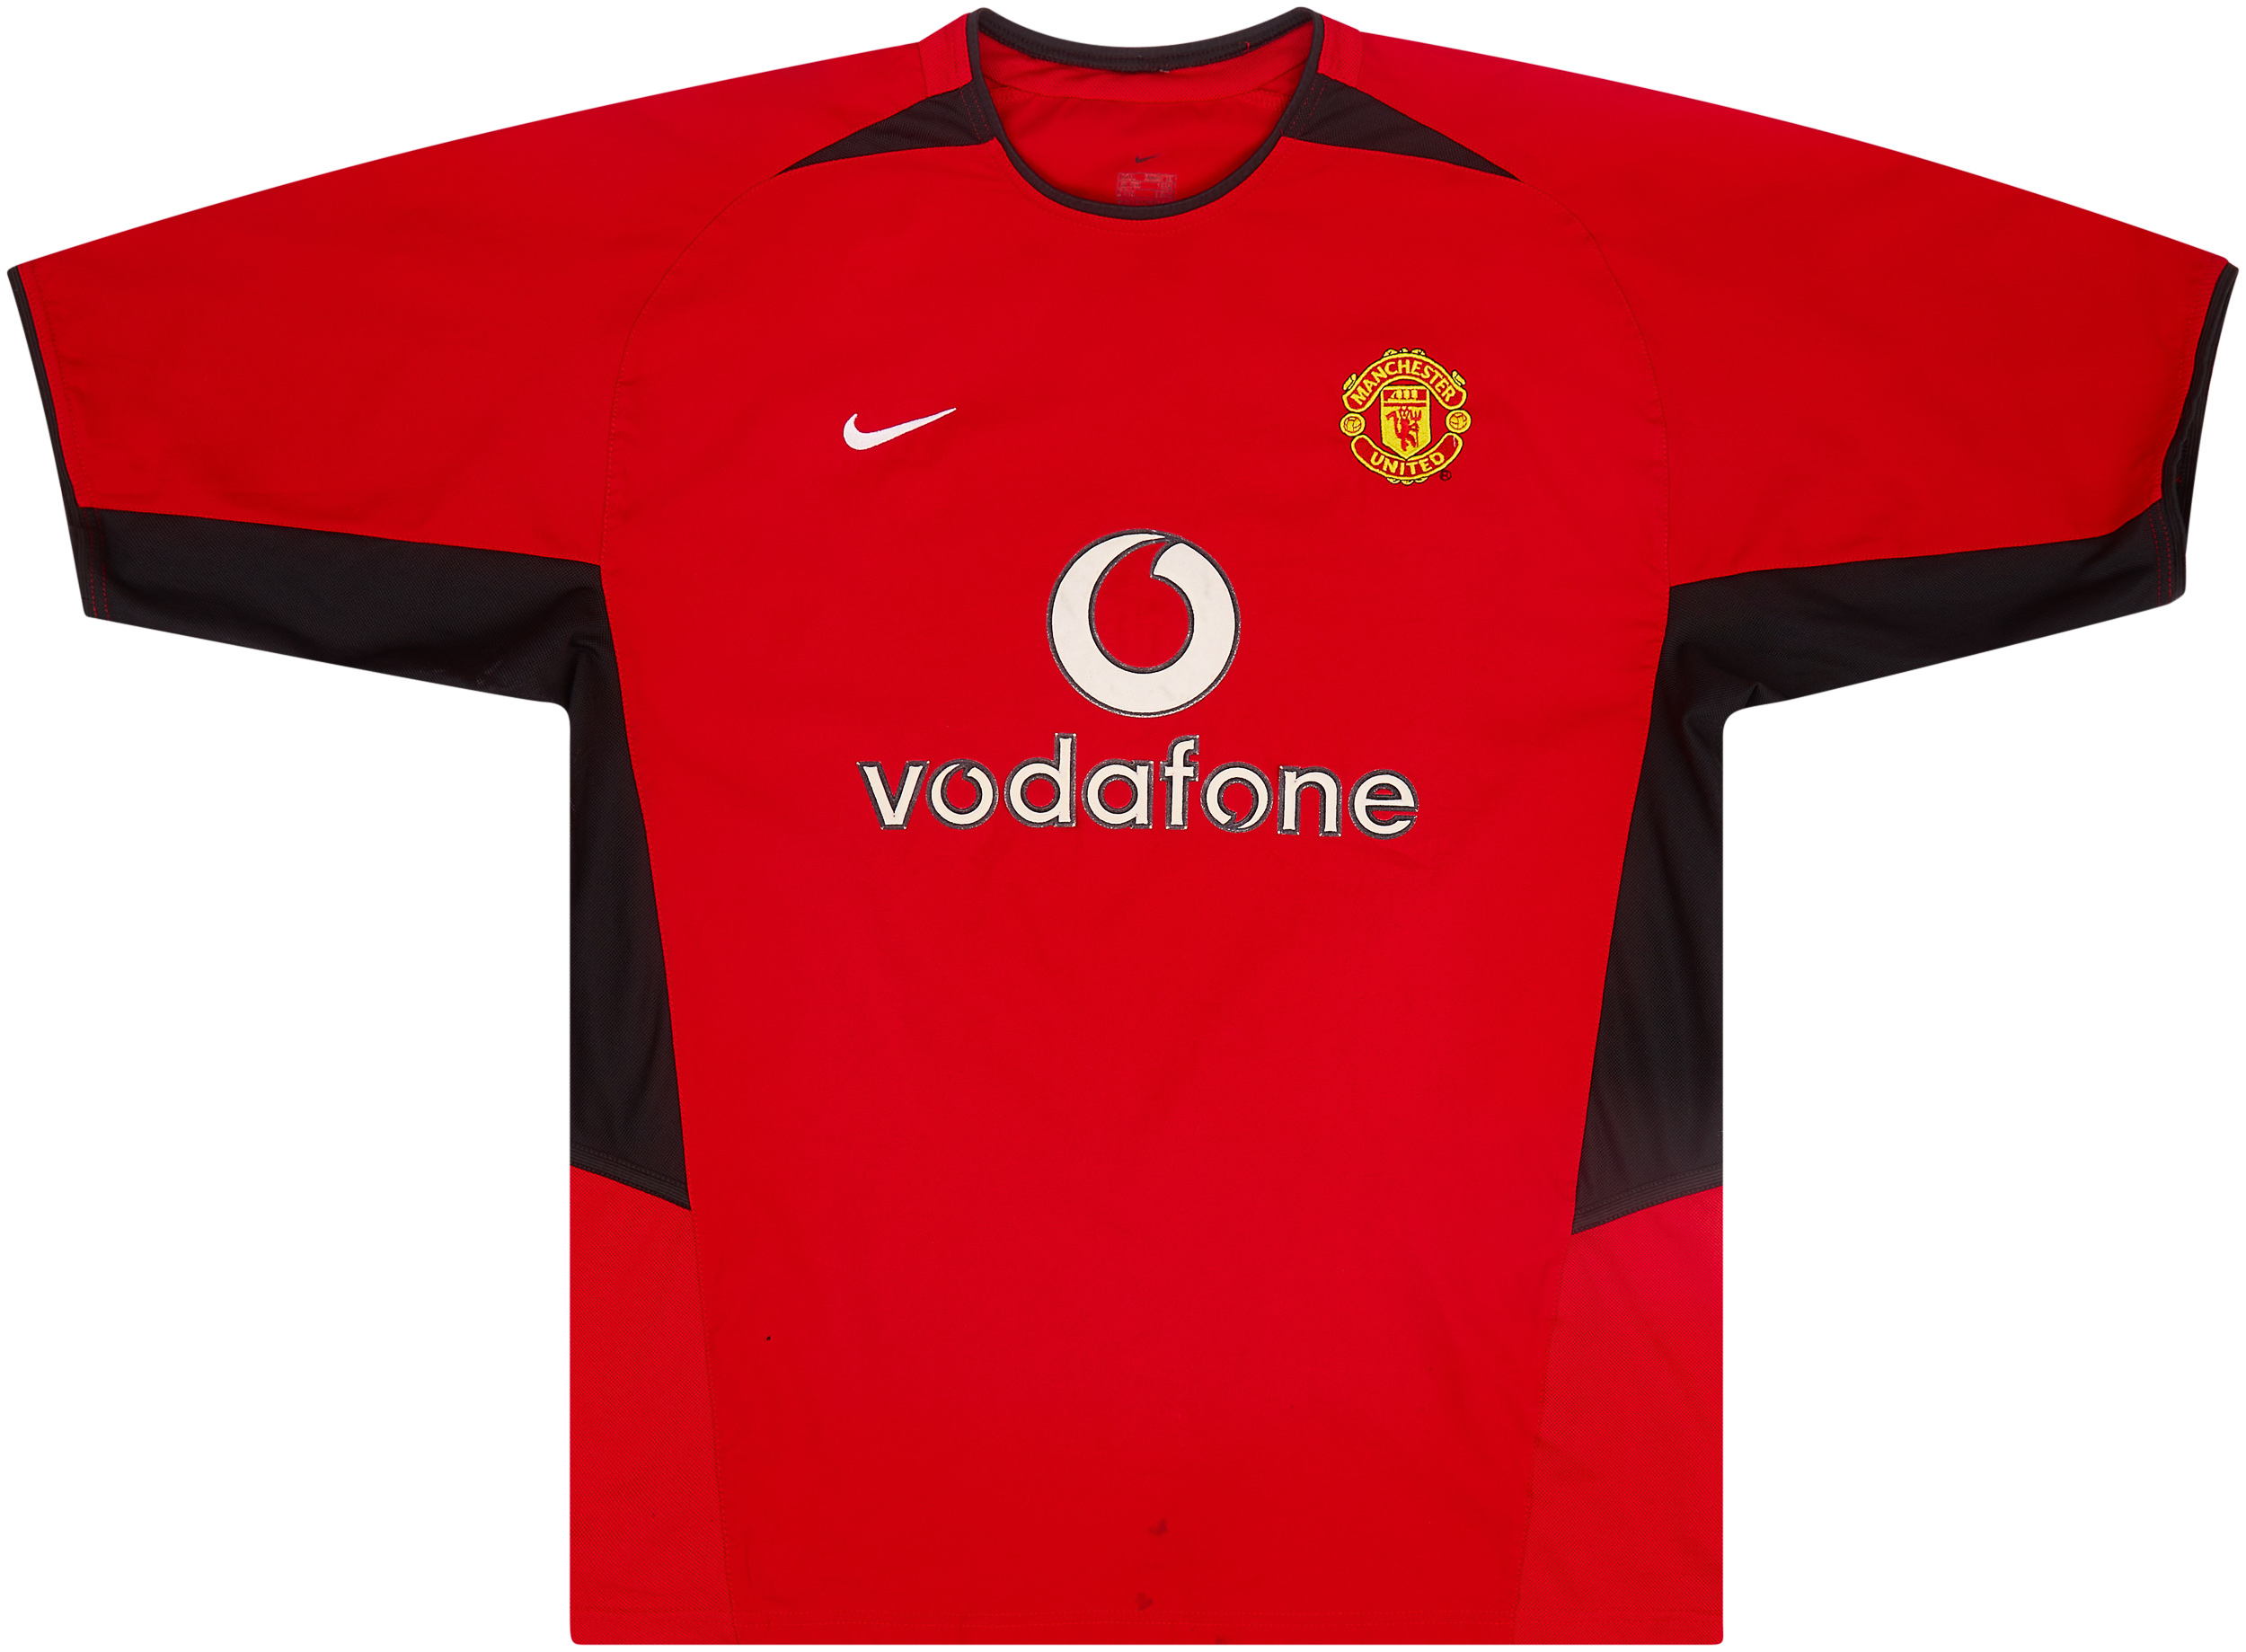 2002-04 Manchester United Home Shirt - 5/10 - (L)